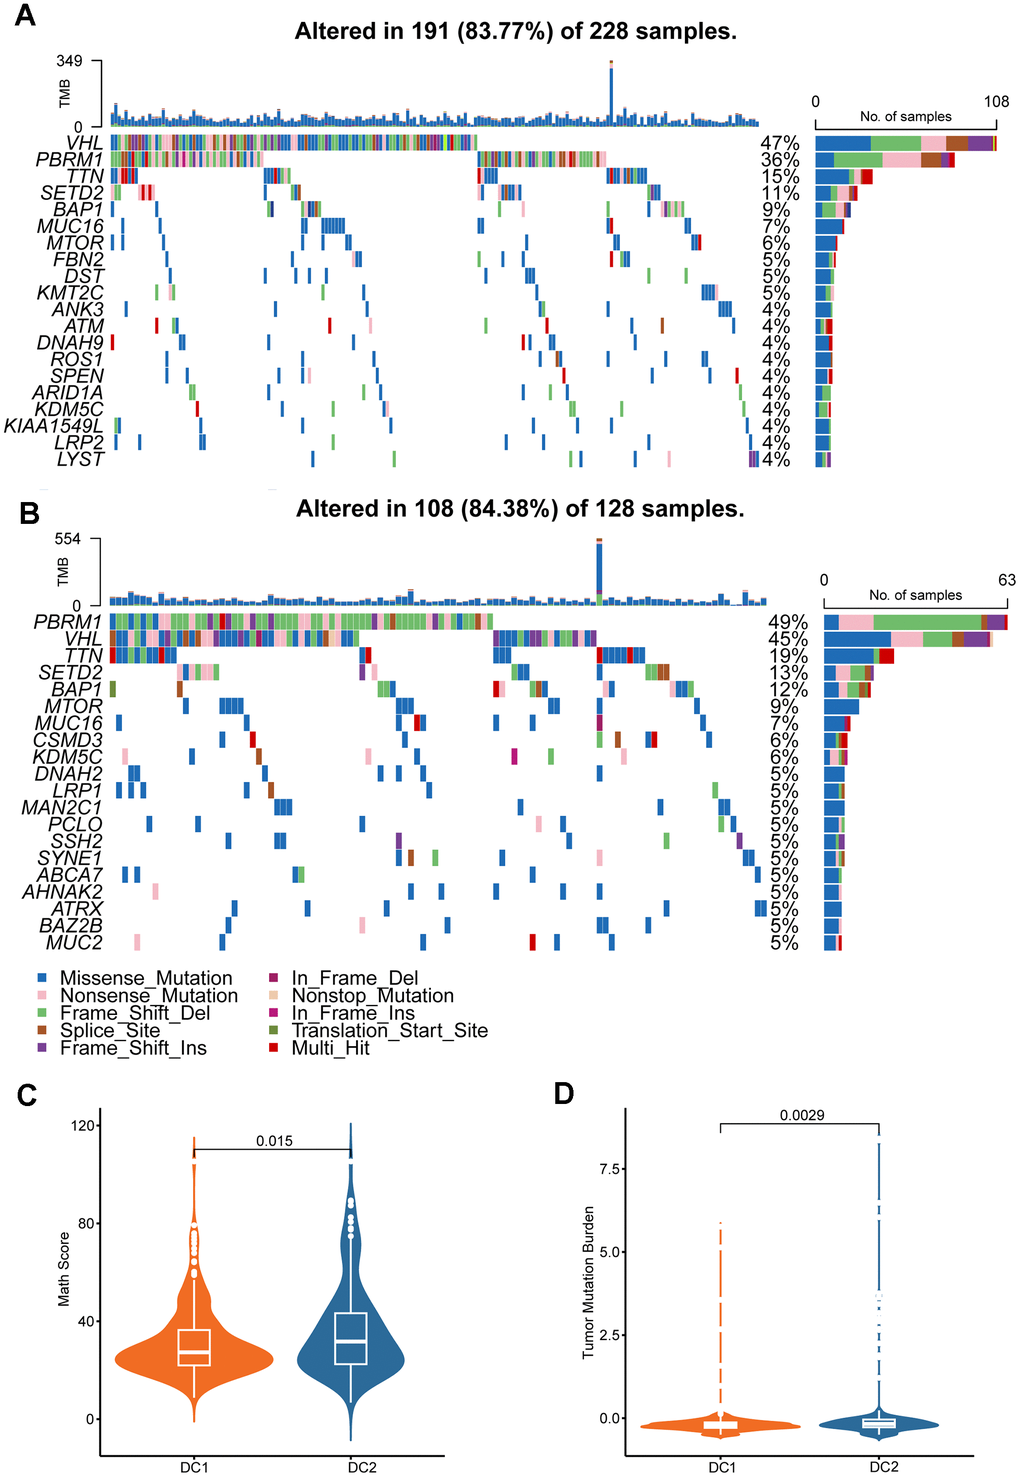 Genomic alterations in disulfidptosis-related signatures. Genomic profiling of the 20 most frequently altered genes in the DC1 (A) and DC2 (B) groups. (C) Comparison of MATH score between the two ccRCC subtypes. (D) Comparison of the TMB levels between the two ccRCC subtypes.